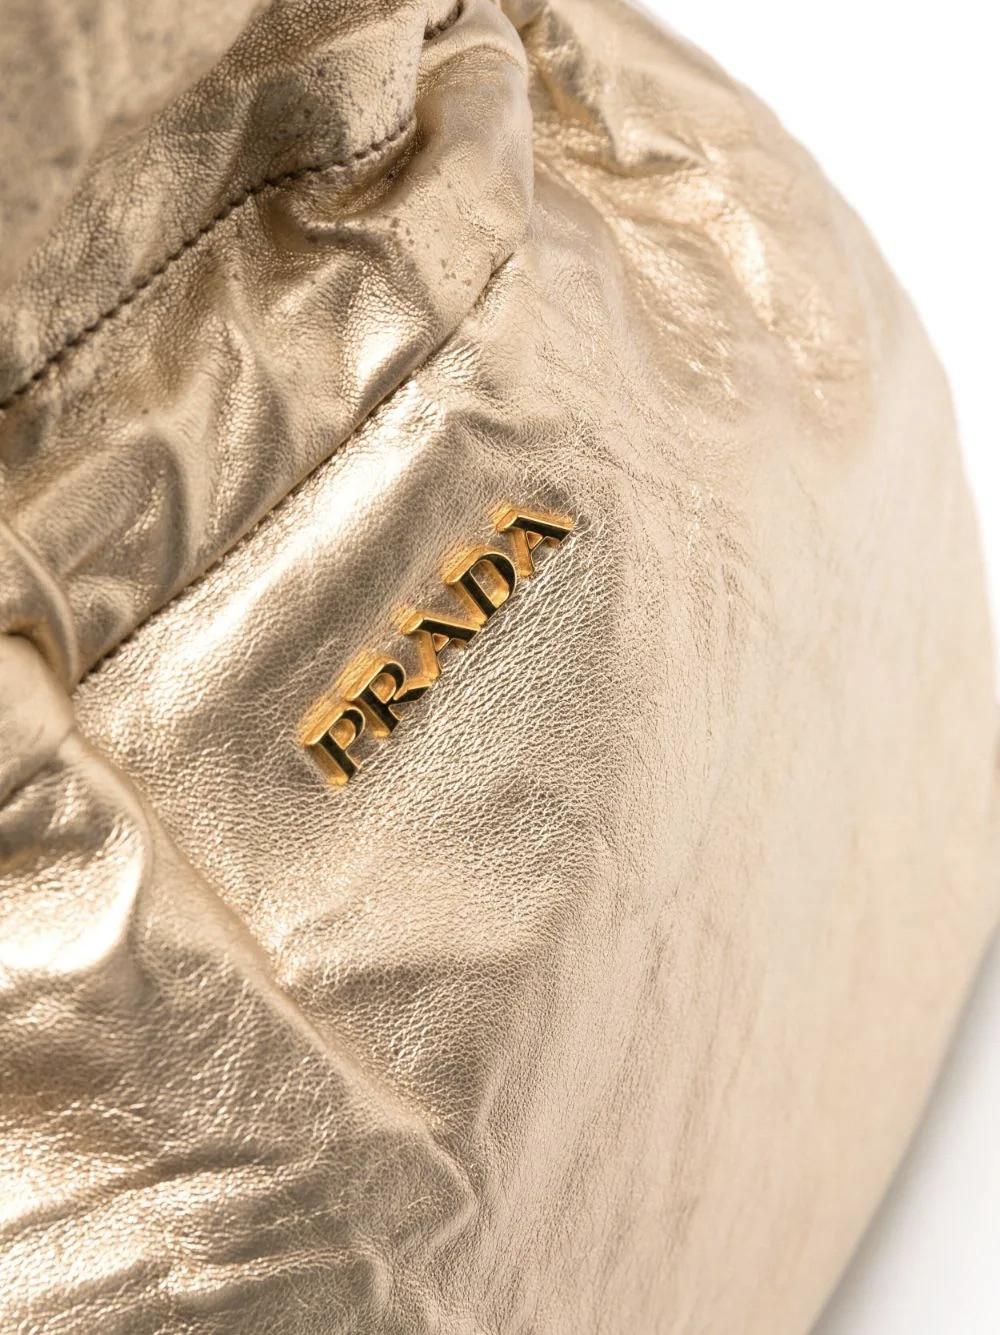 Prada gold-tone large leather tote bag featuring a front logo, natural handles and natural drawstring fastening, a soft lamb leather foiled finish, a magnetic fastening, inside usual Prada monogram lining. 
100% Leather
In good vintage condition.